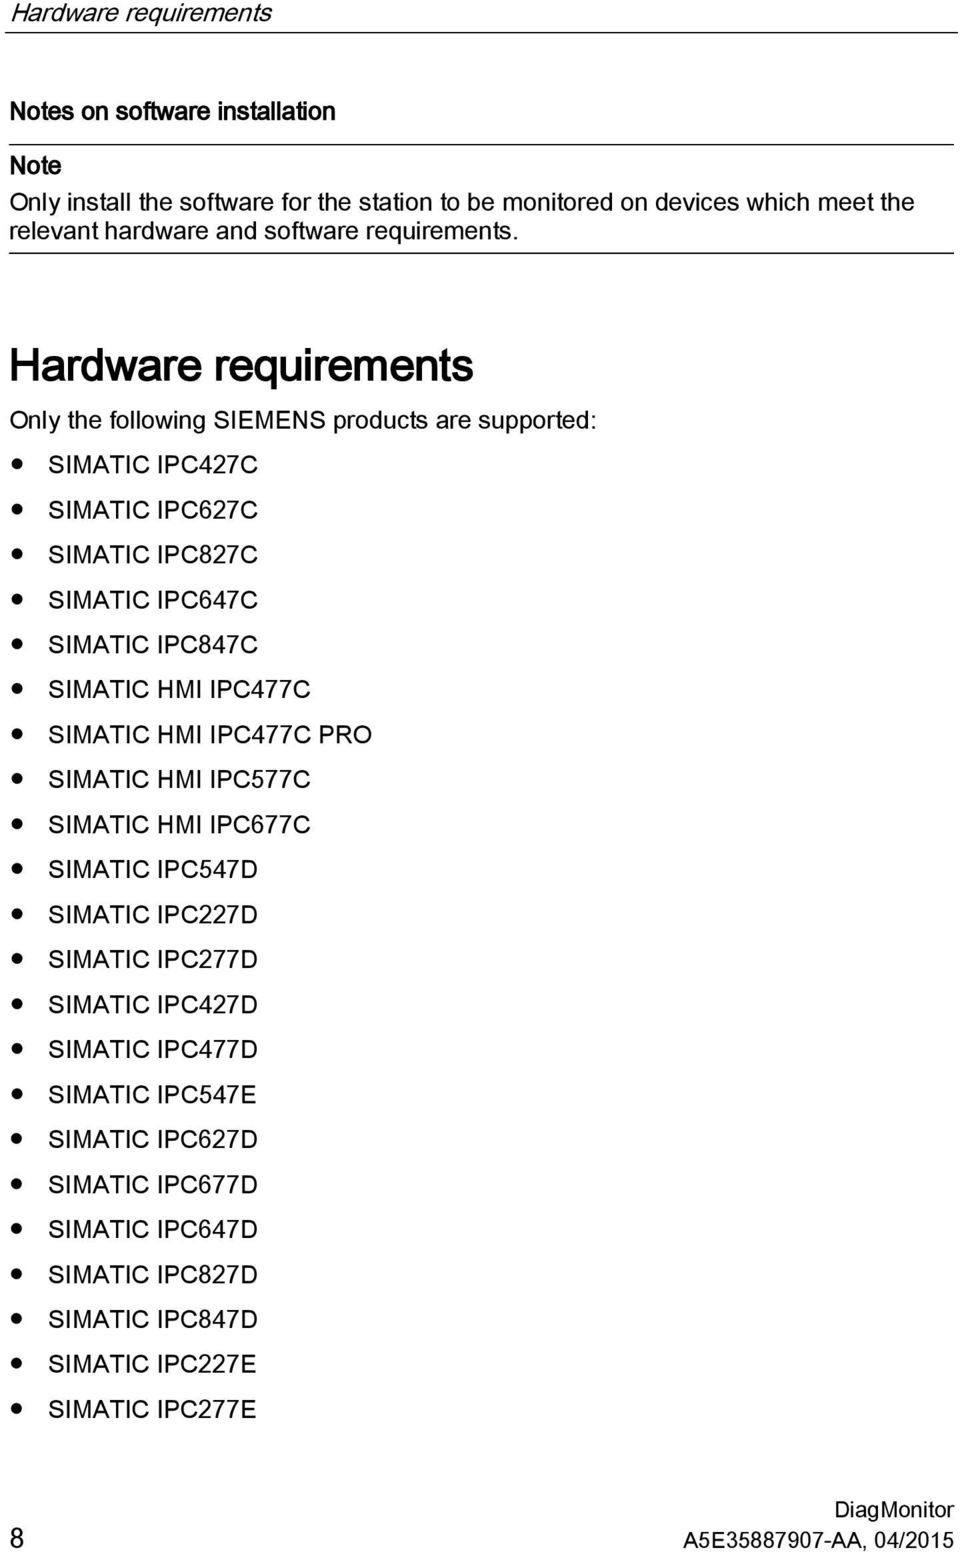 Hardware requirements Only the following SIEMENS products are supported: SIMATIC IPC427C SIMATIC IPC627C SIMATIC IPC827C SIMATIC IPC647C SIMATIC IPC847C SIMATIC HMI